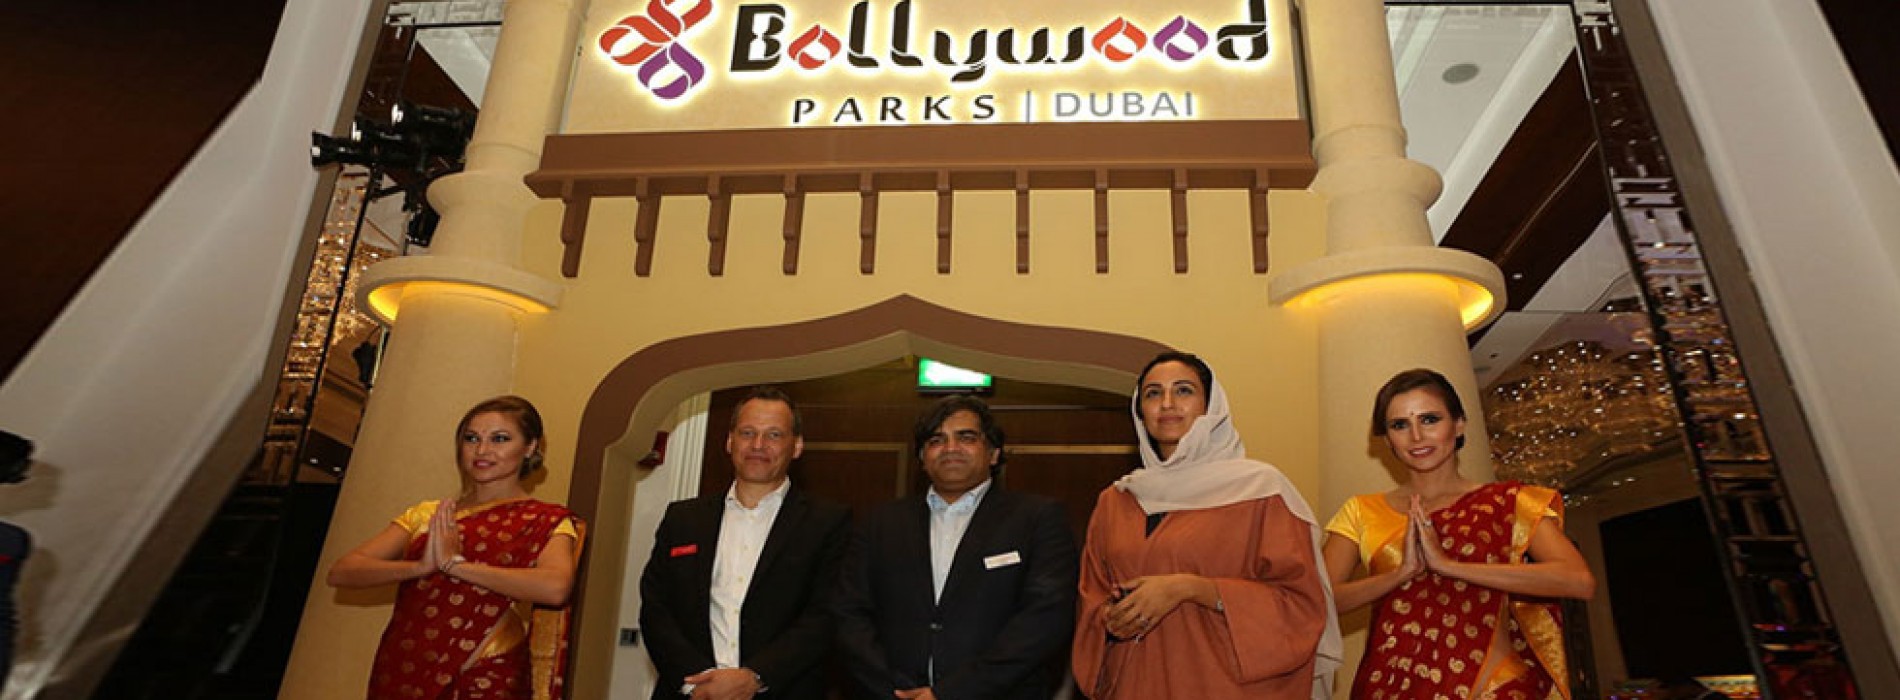 BOLLYWOOD PARKS DUBAI UNVEILS ITS STAR STUDDED ATTRACTIONS